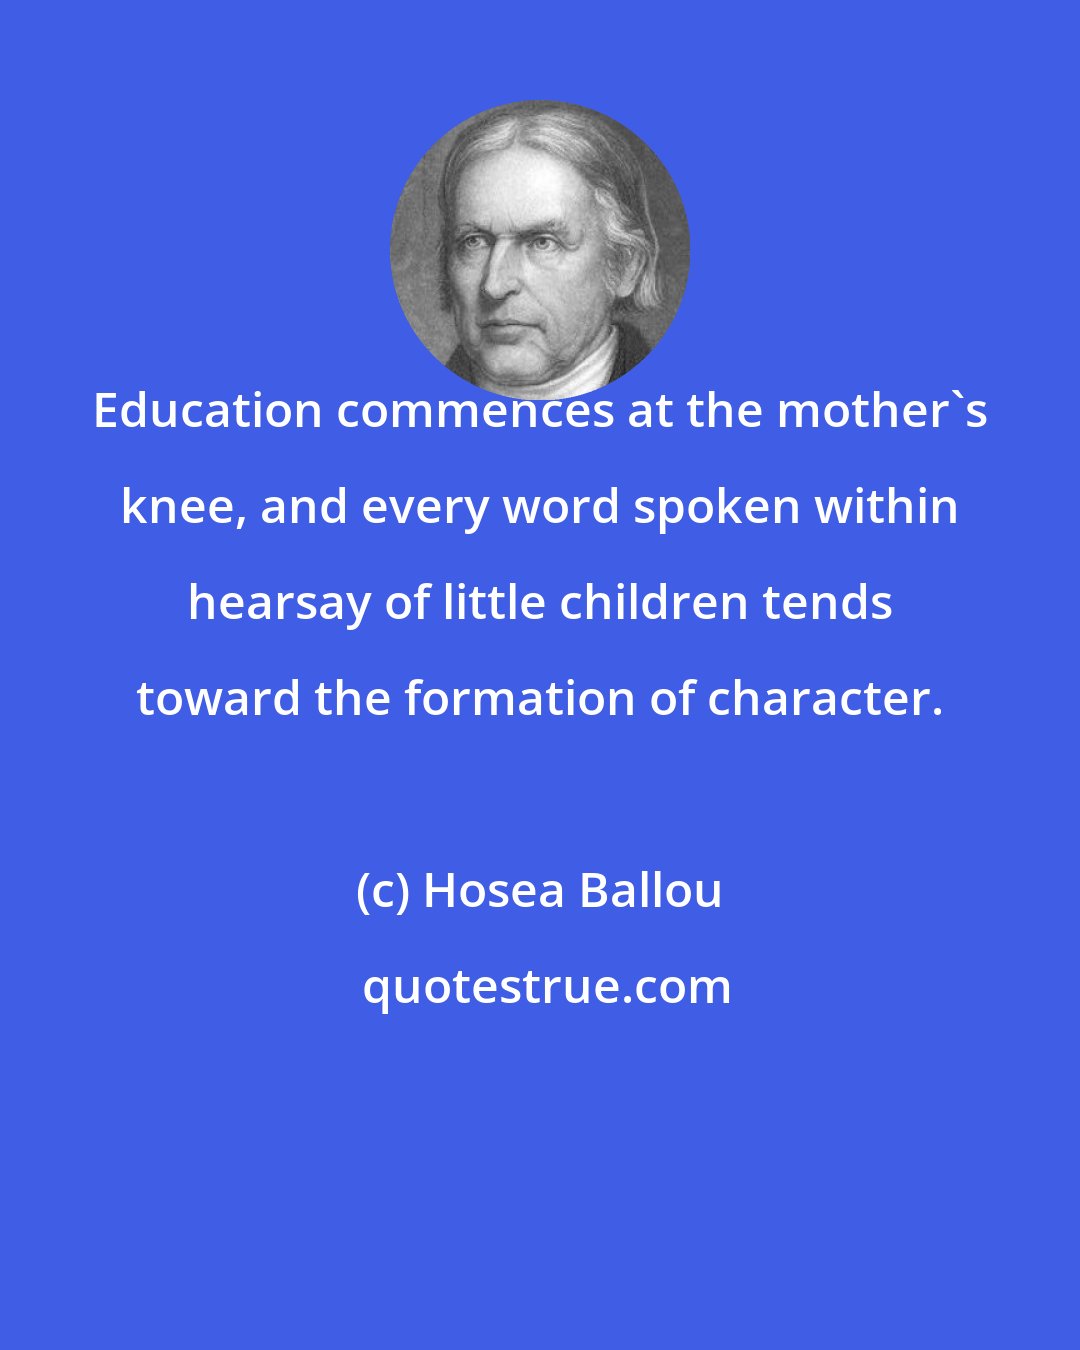 Hosea Ballou: Education commences at the mother's knee, and every word spoken within hearsay of little children tends toward the formation of character.